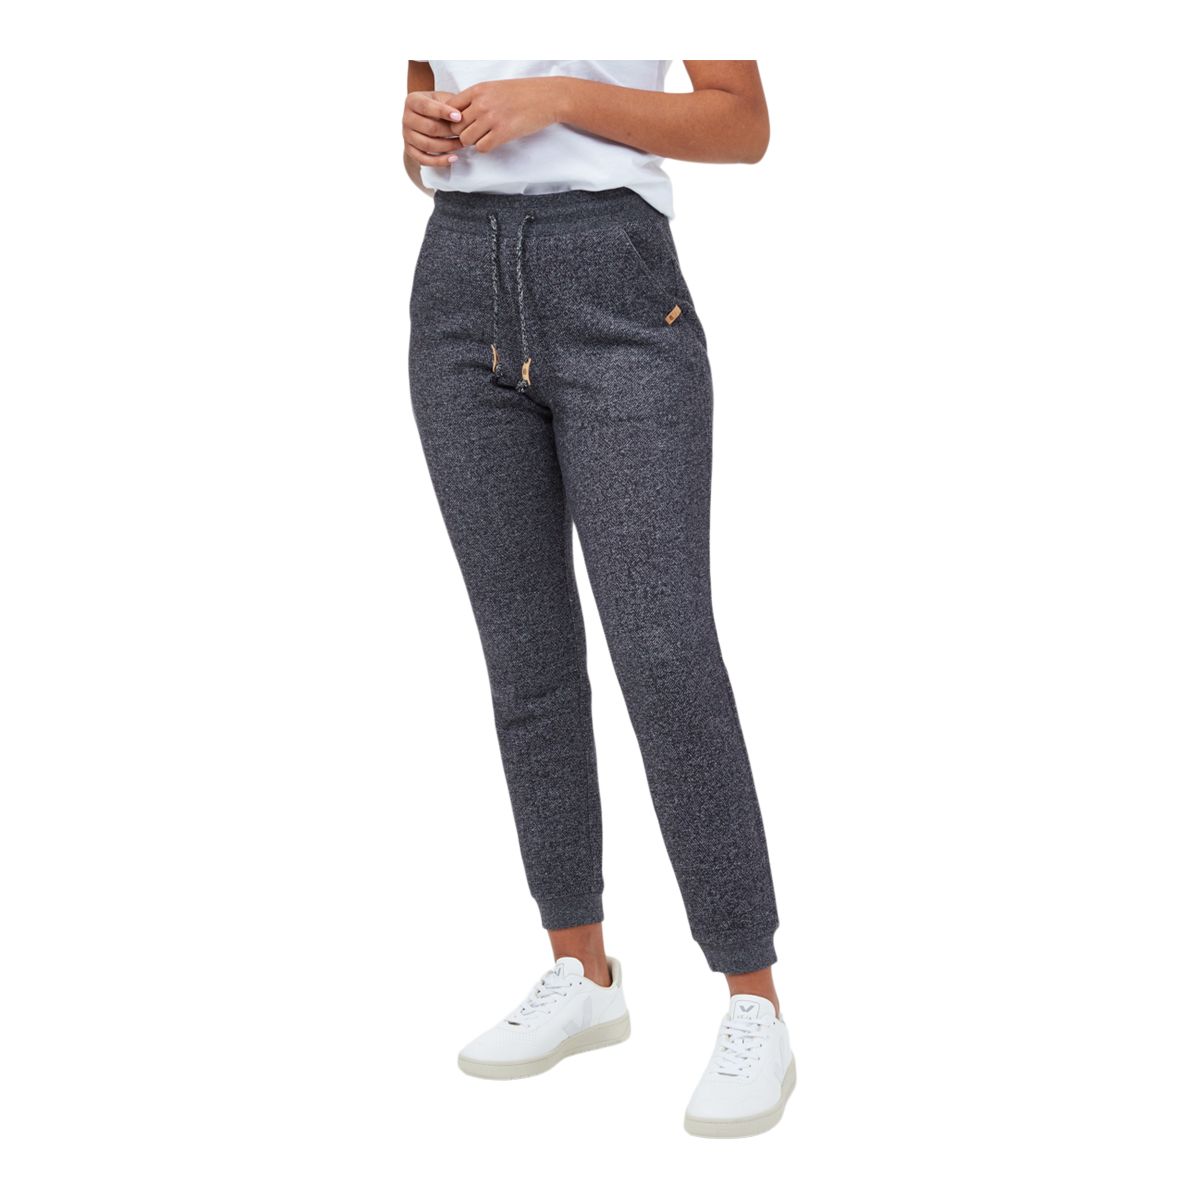 Image of Tentree Women's Bamone Sweatpants Casual Tapered